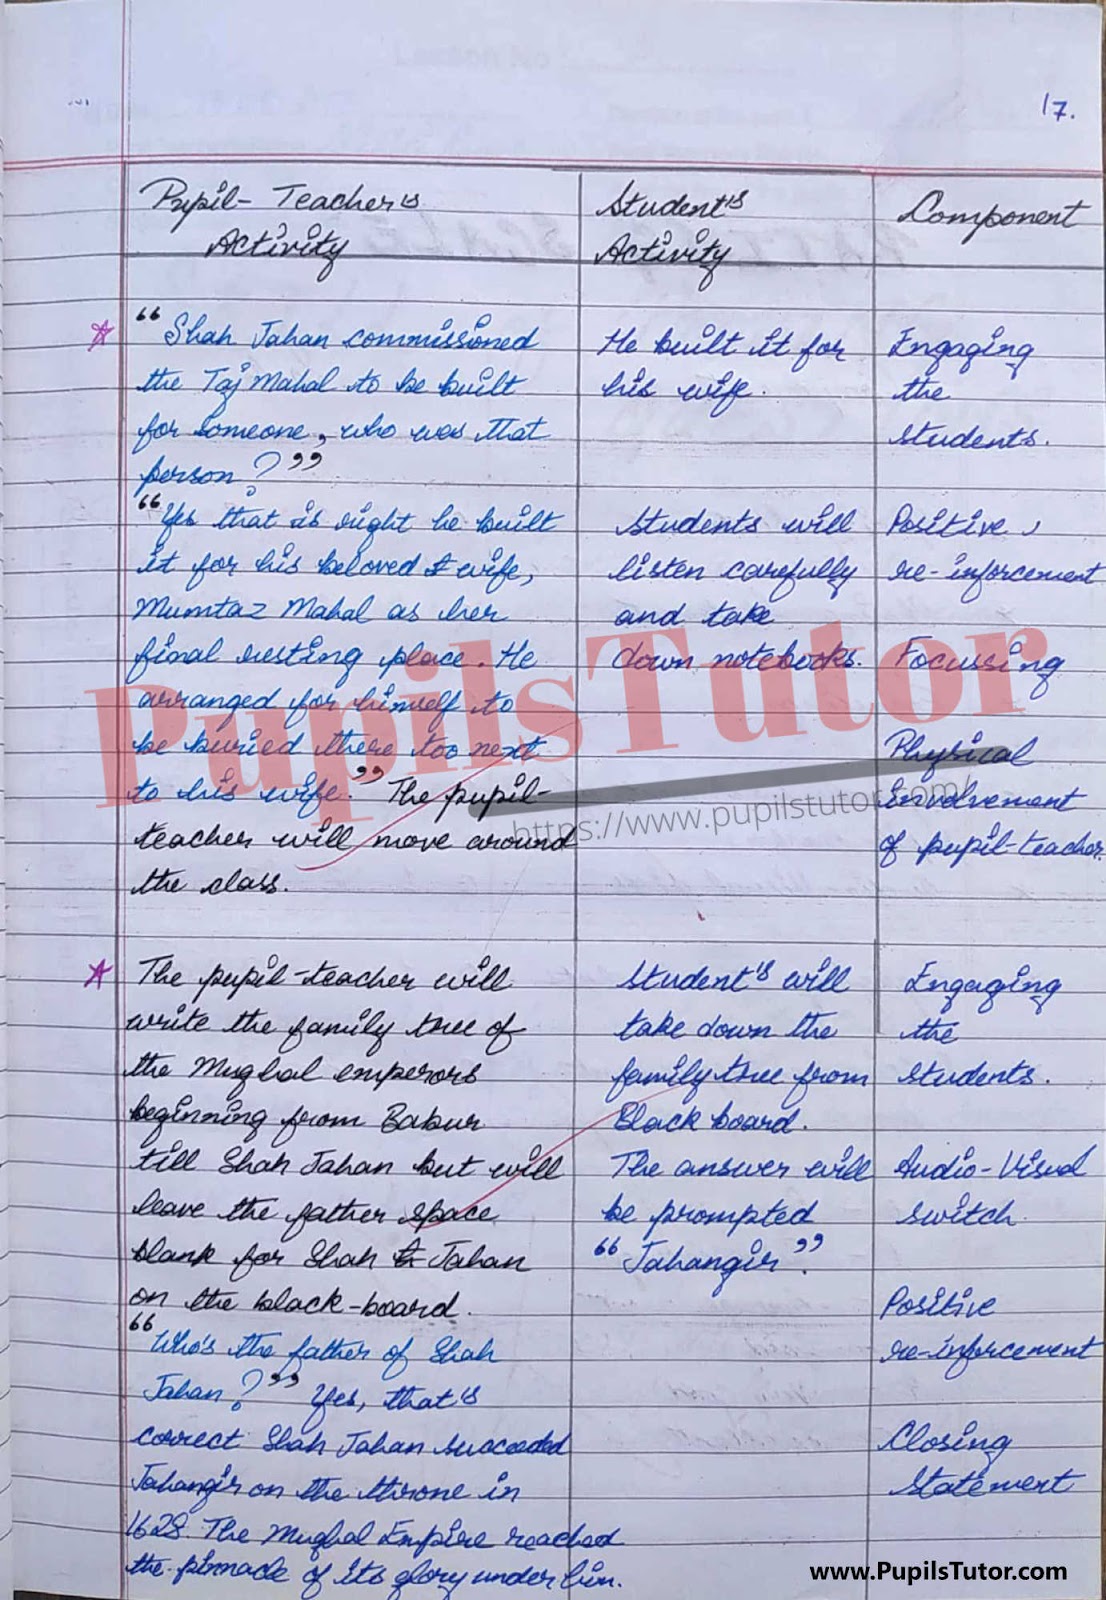 Social Science (History) Lesson Plan On Shah Jahan For Class/Grade 7 For CBSE NCERT School And College Teachers  – (Page And Image Number 3) – www.pupilstutor.com